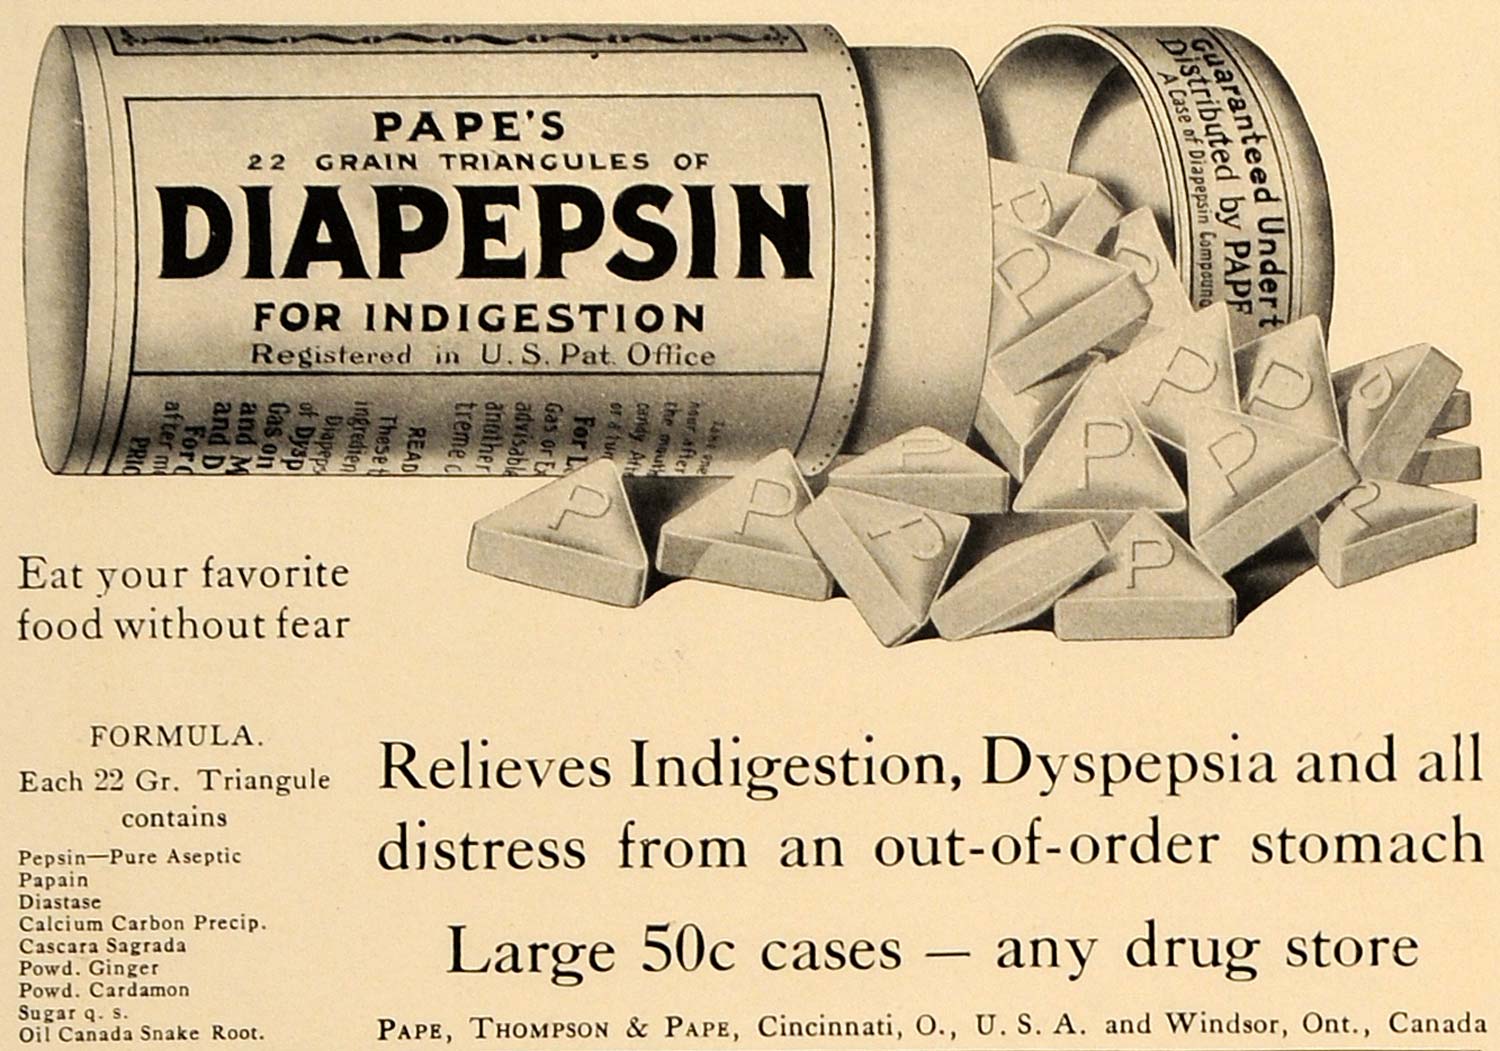 1909 Ad Papes Diapepsin Indigestion Dysepsia Thompson - ORIGINAL ADVERTISING CL4